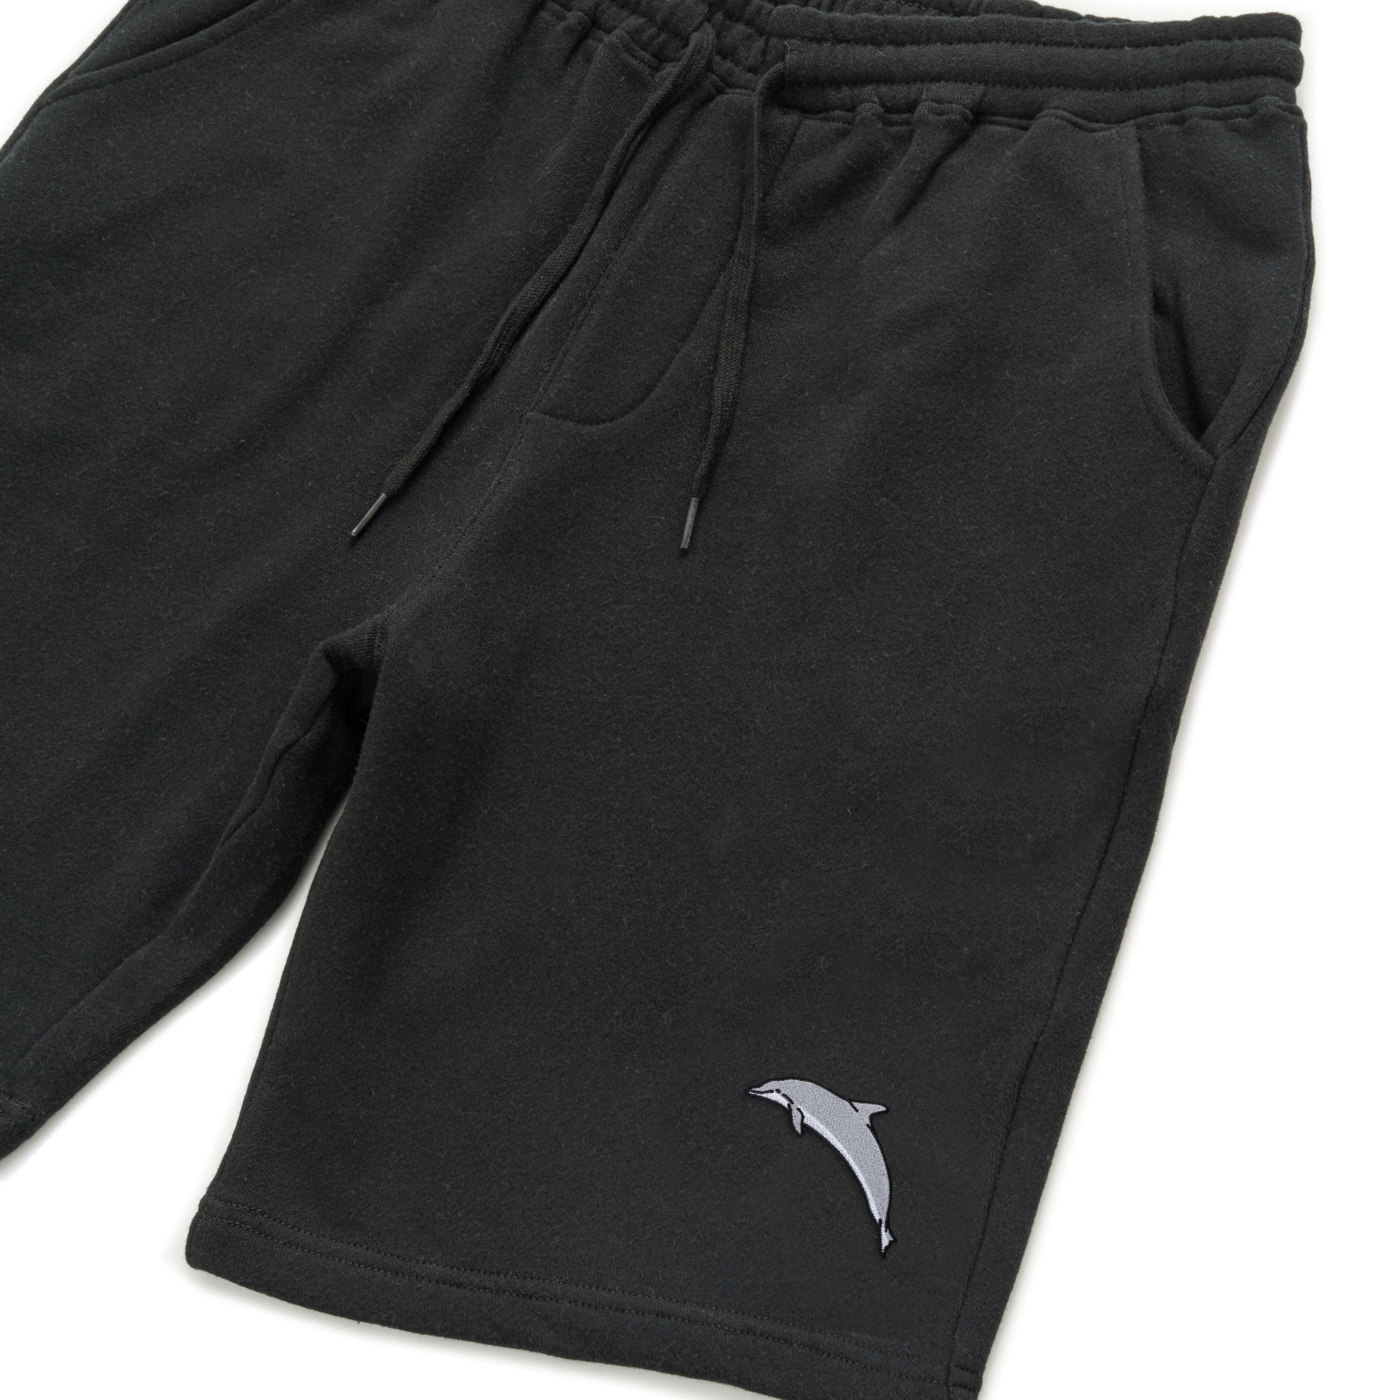 Bobby's Planet Men's Embroidered Dolphin Shorts from Seven Seas Fish Animals Collection in Black Color#color_black